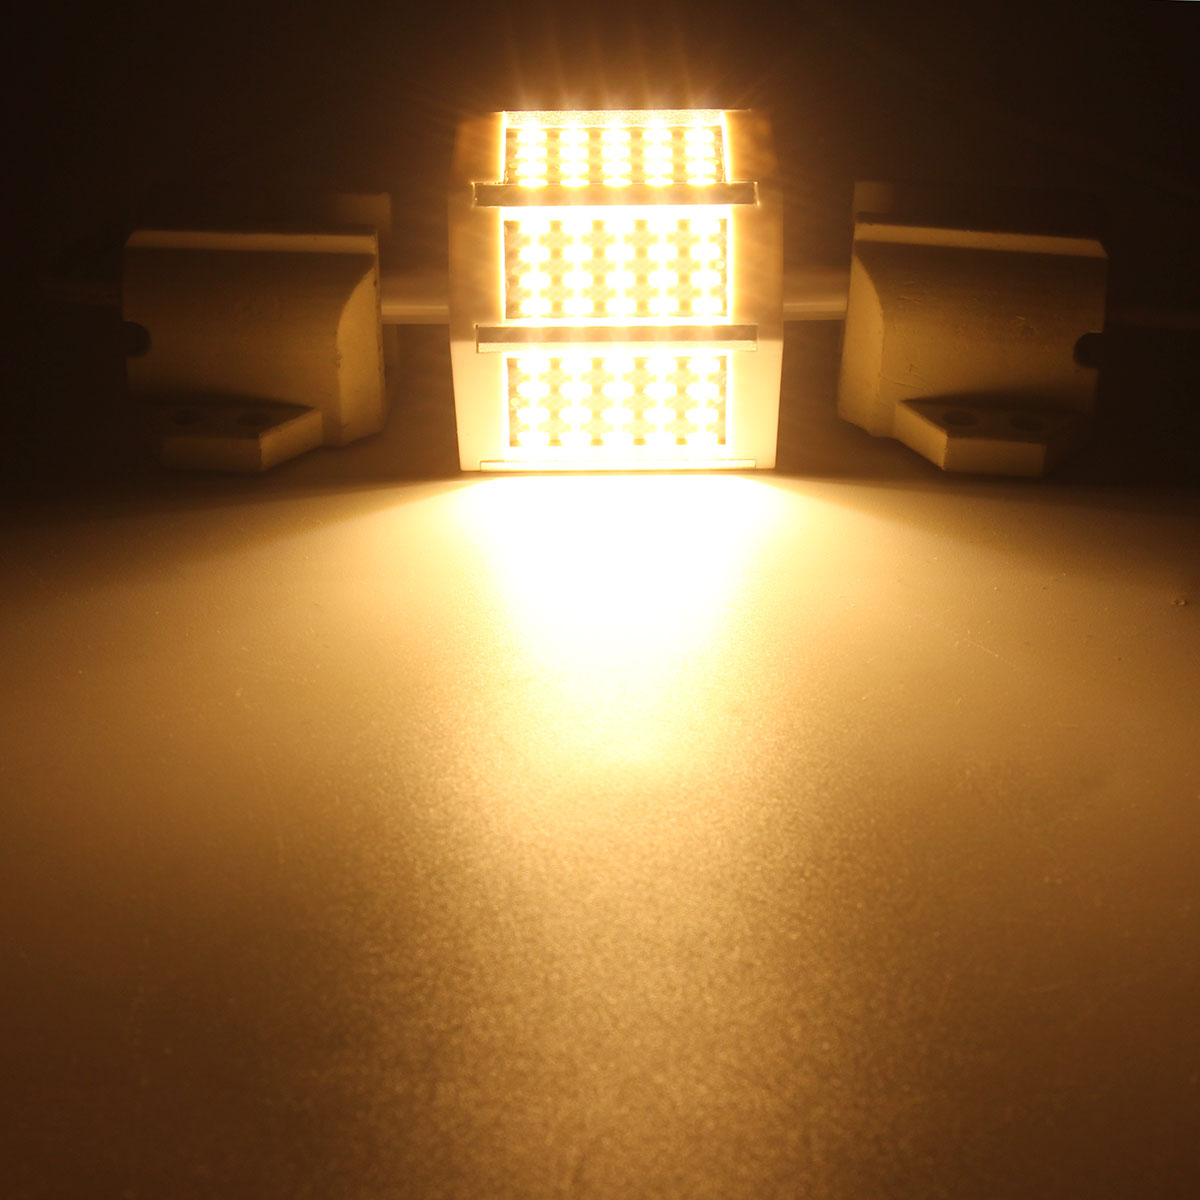 Dimmable-R7S-78mm-8W-60-SMD-4014-LED-Black-Plate-Warm-White-White-Lamp-Light-Bulb-AC220VAC110V-1051521-1